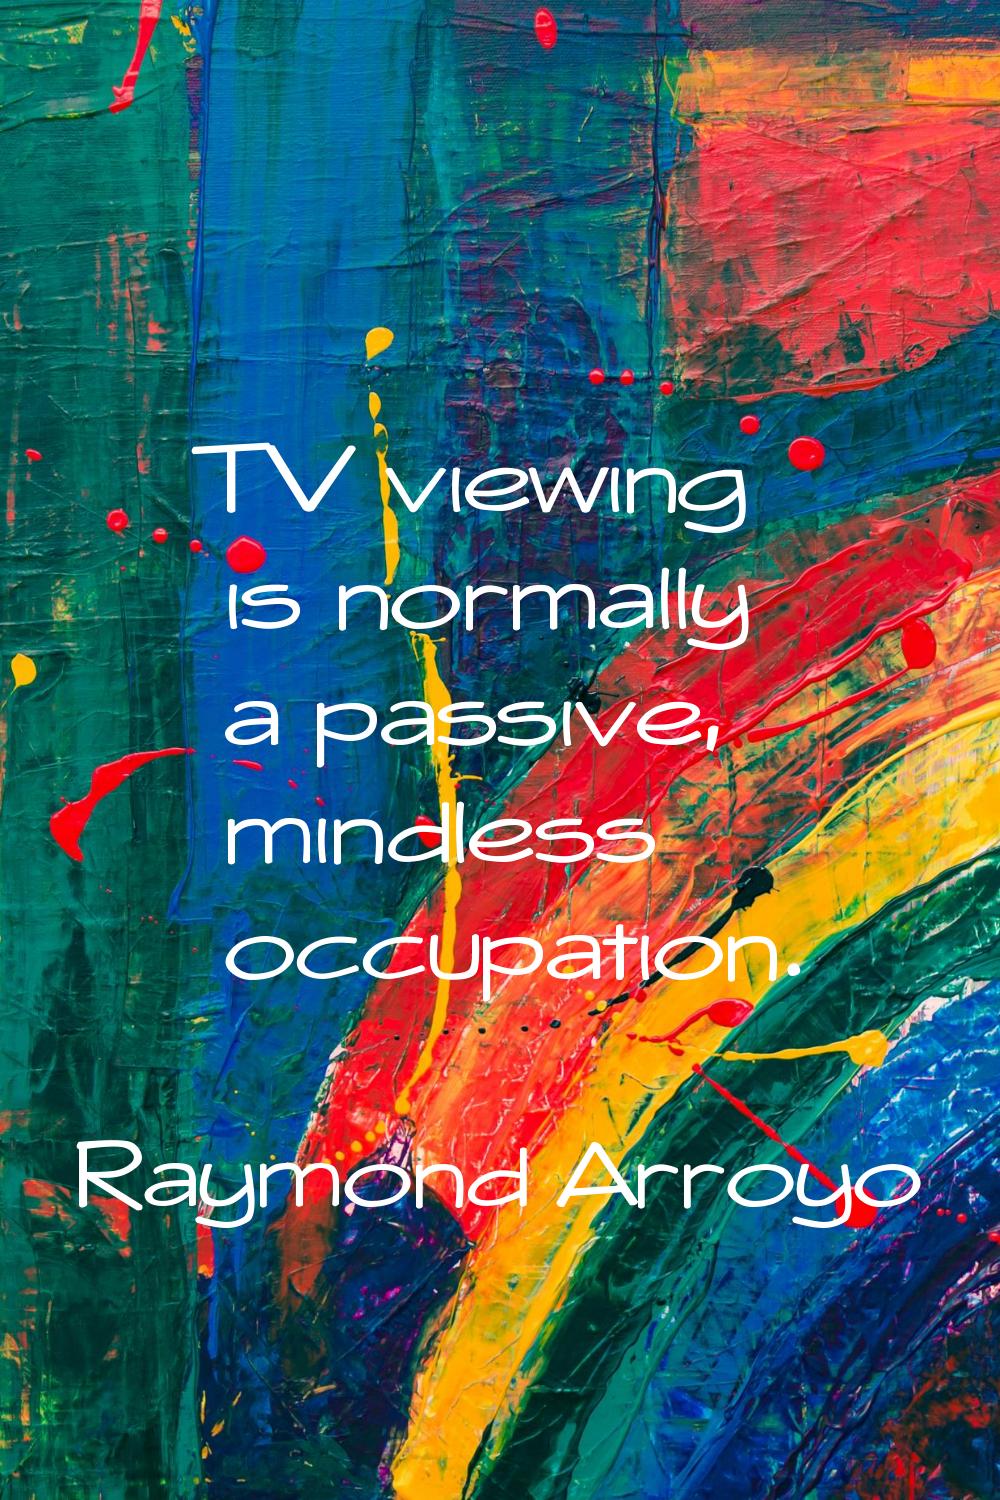 TV viewing is normally a passive, mindless occupation.